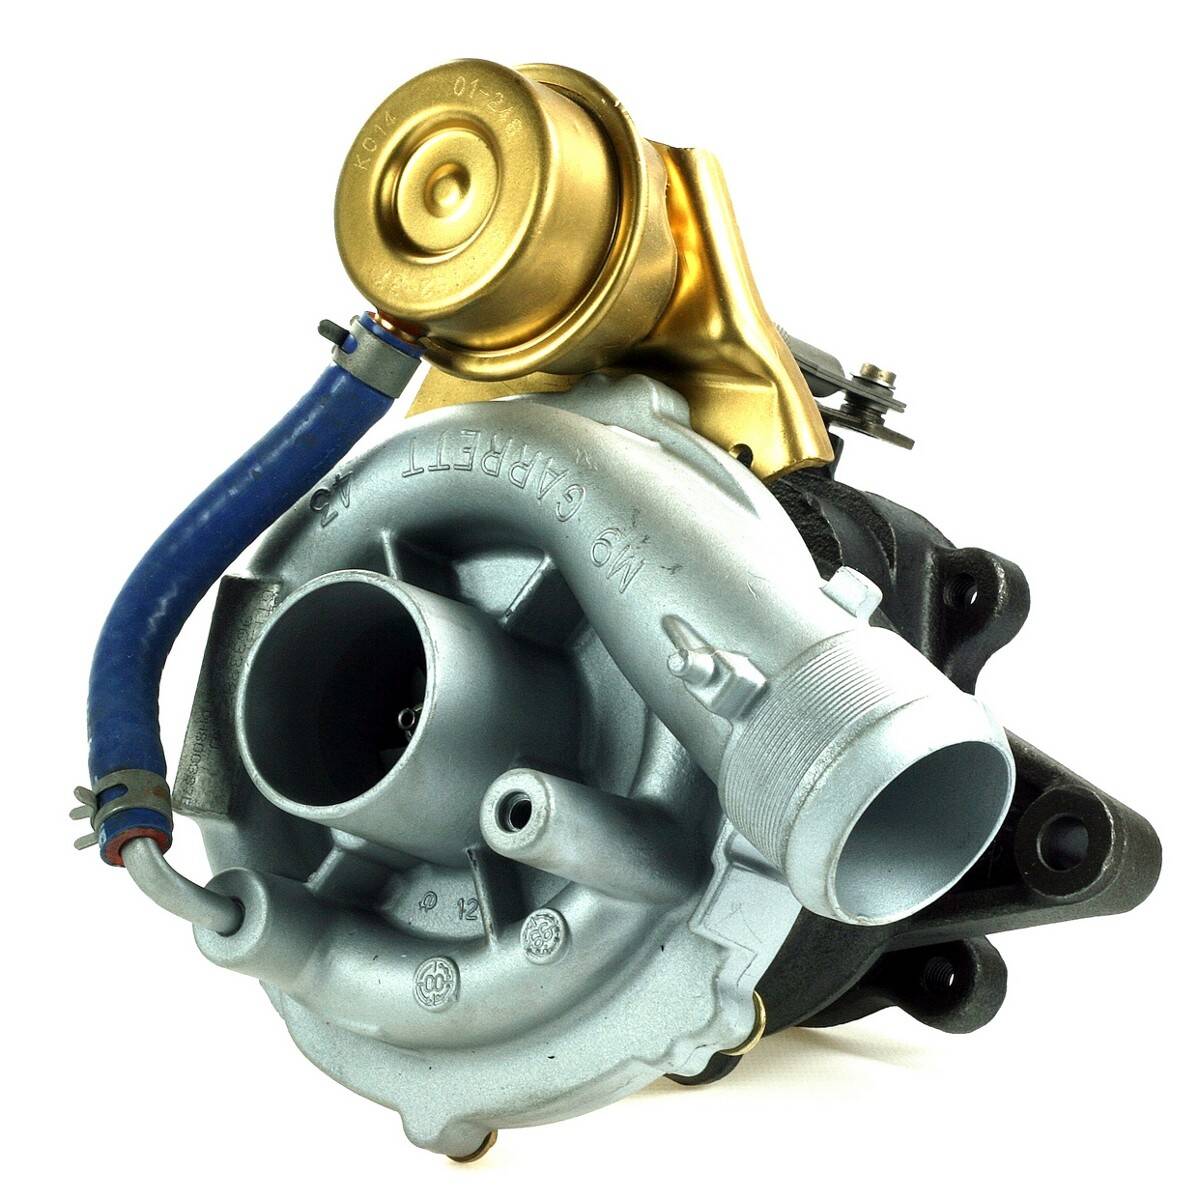 TURBOCHARGER TURBO REMANUFACTURED 53039700009 706977-0002